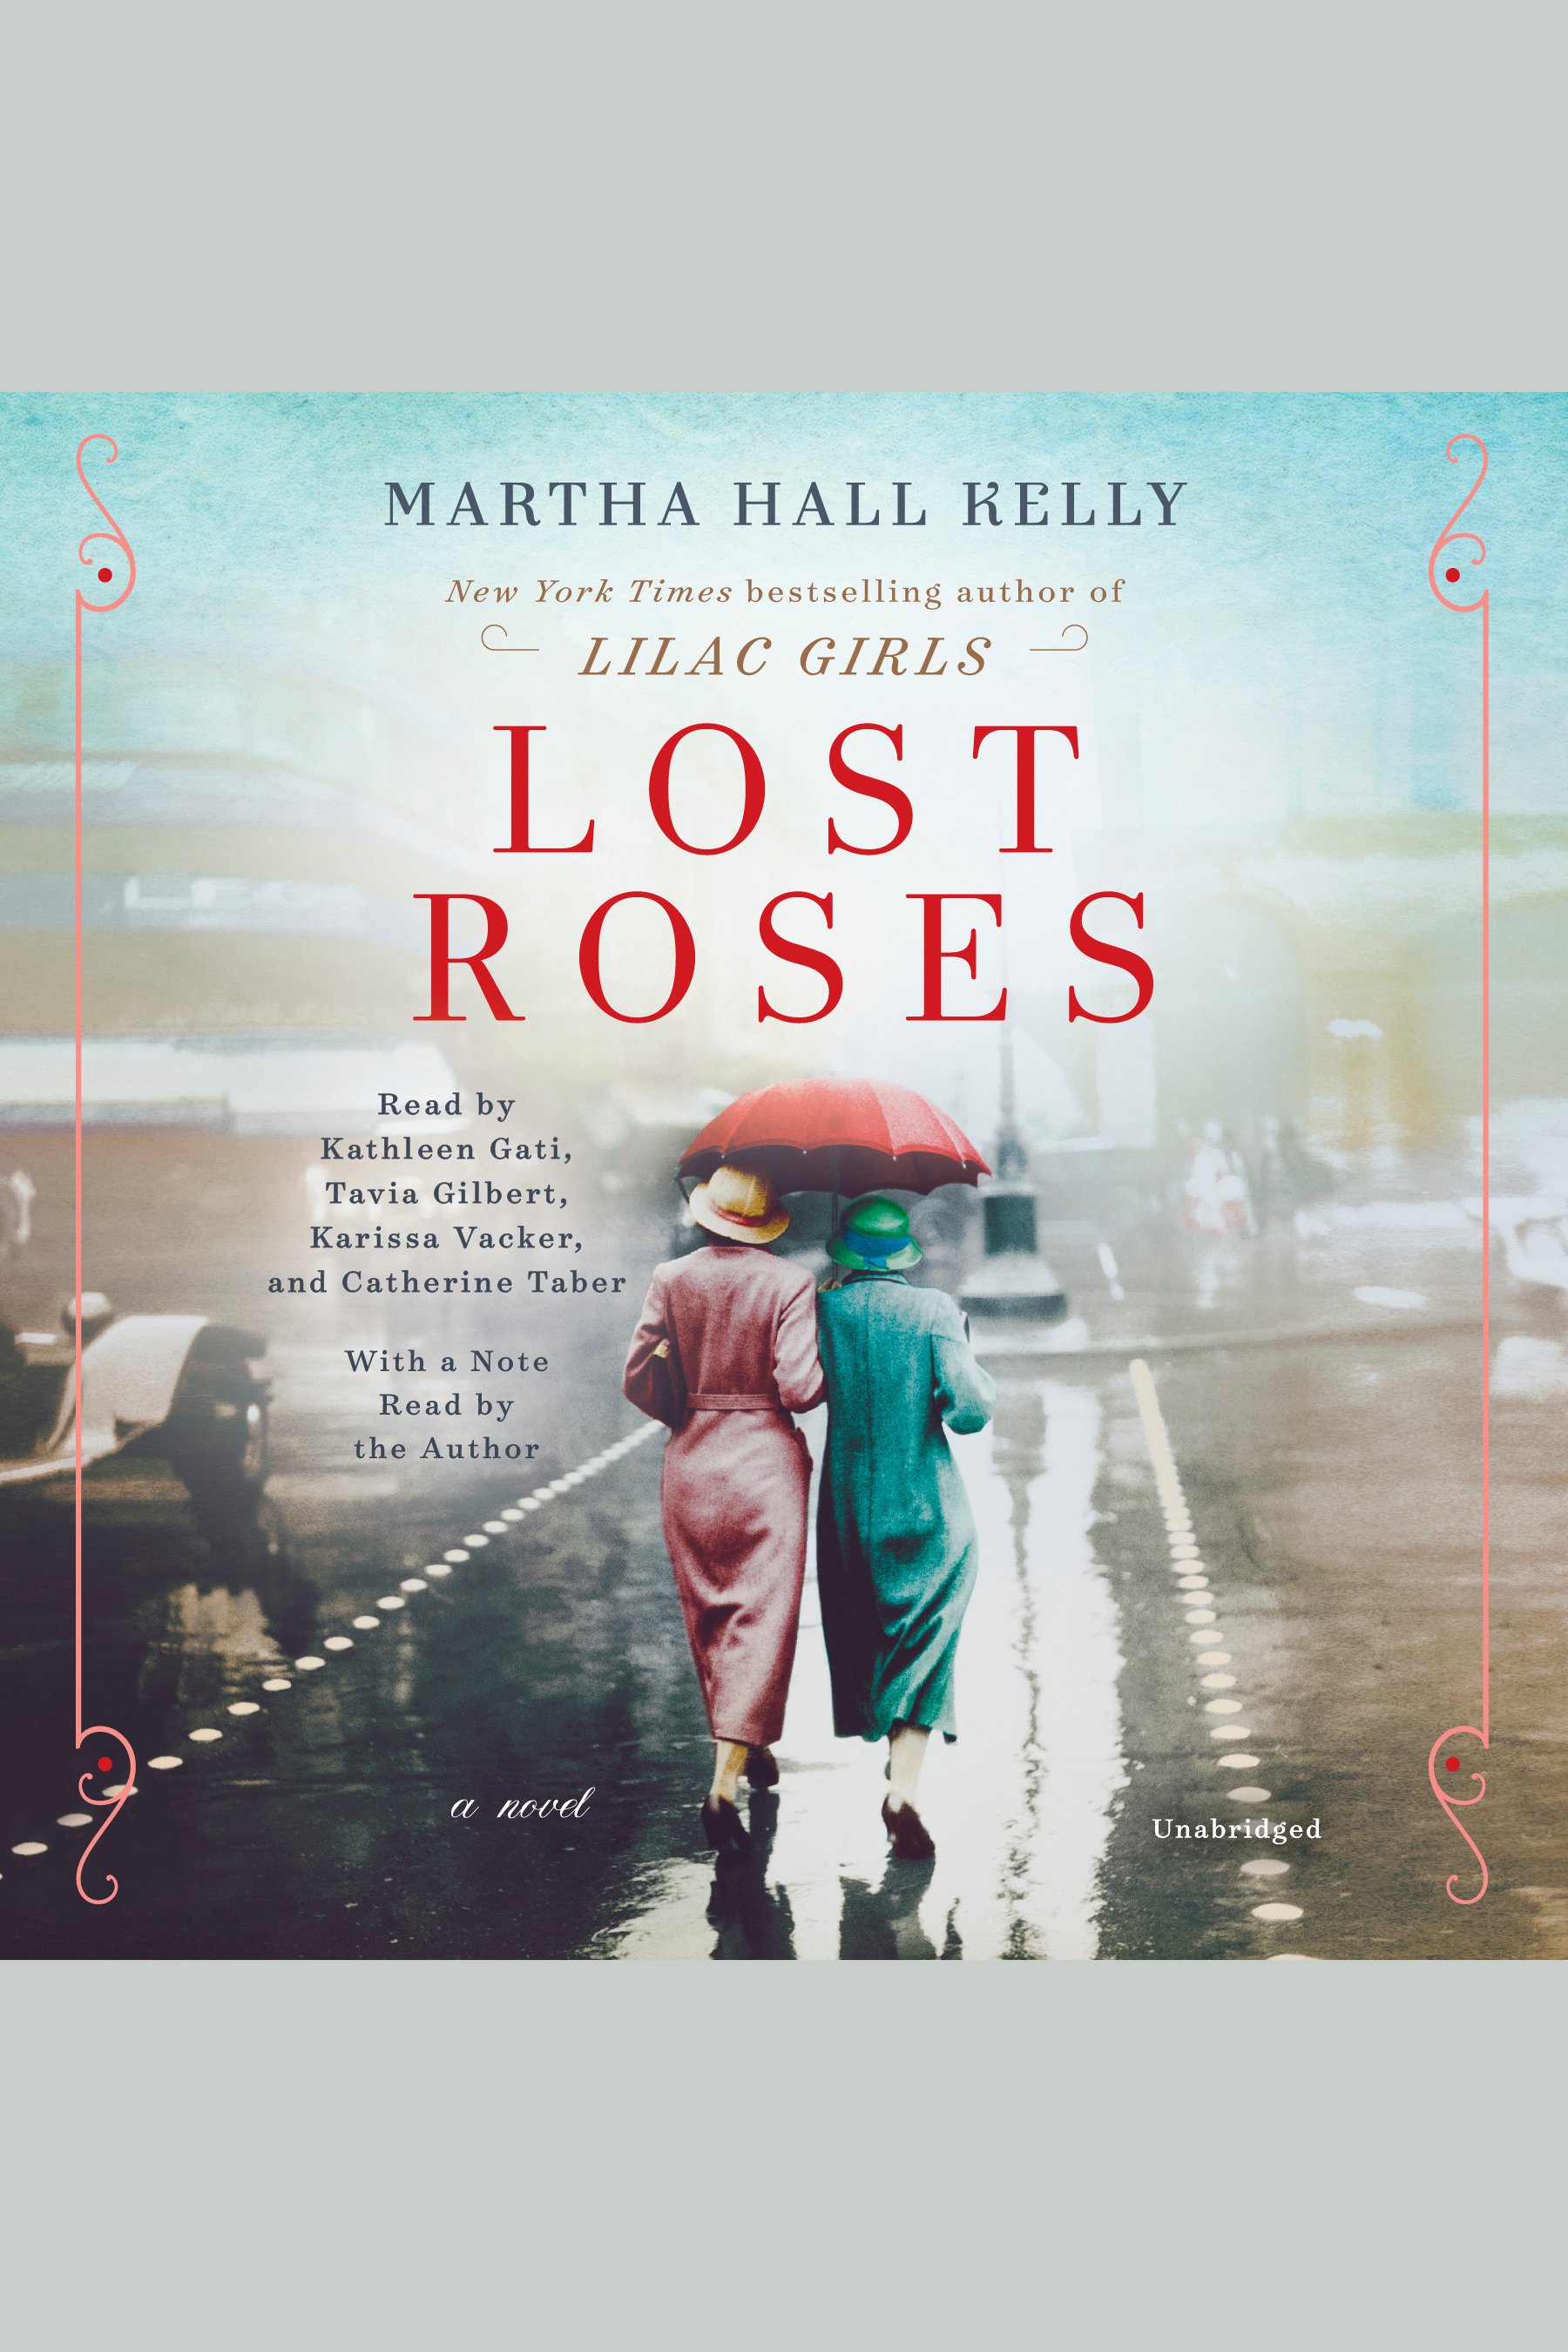 Lost roses cover image